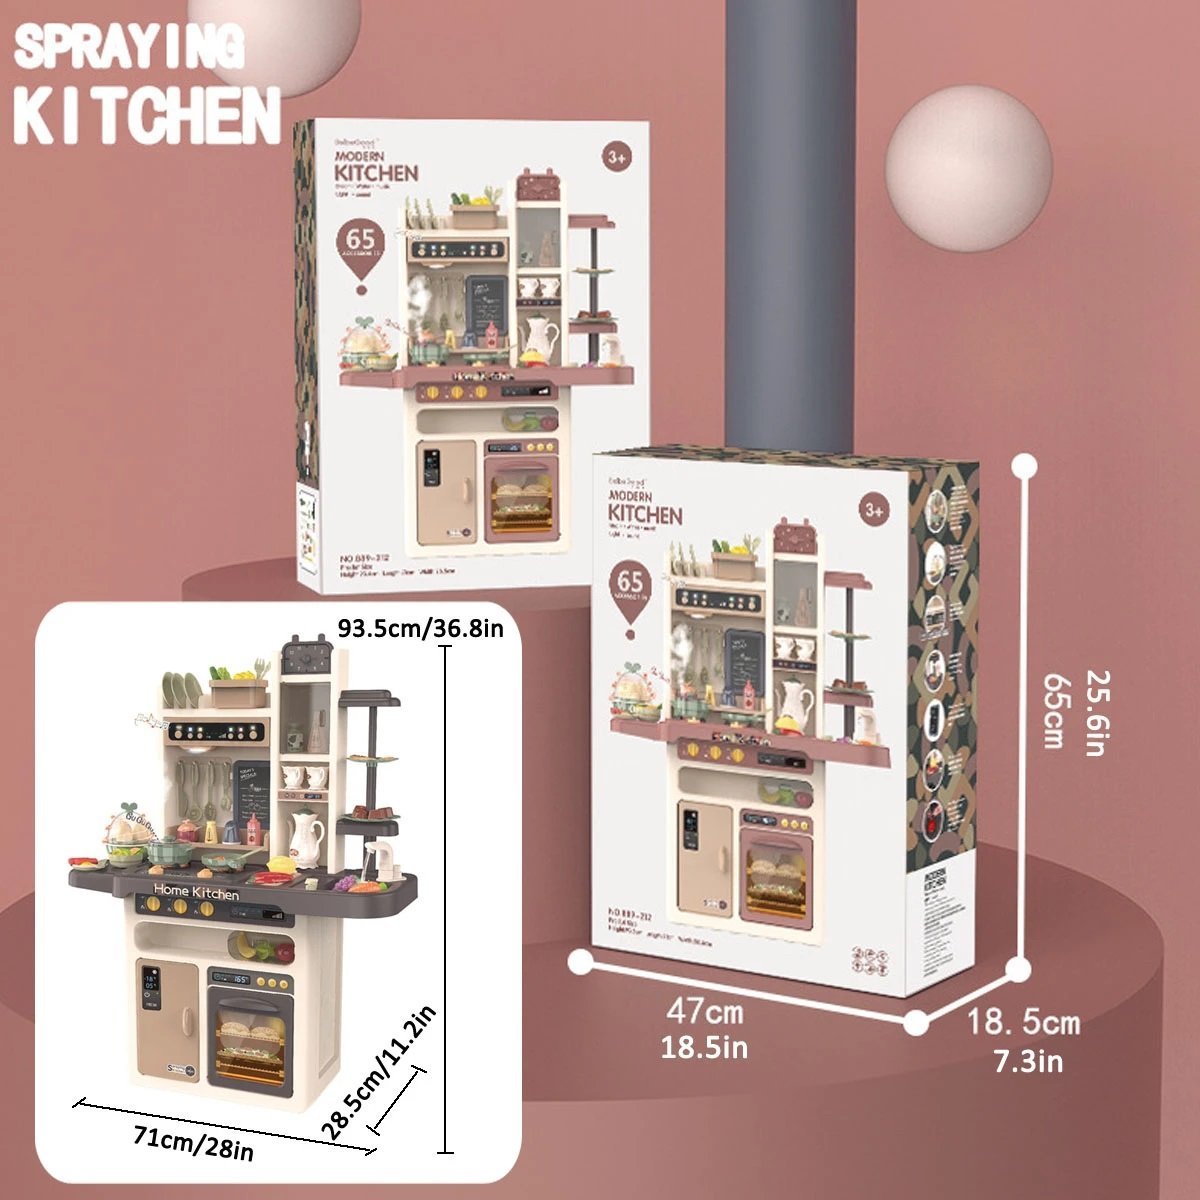 65pcs 93cm Children Kitchen Kitchenware Play Toy Simulation Steam Spray Cooking Set Cookware Tableware Gift Grey Color